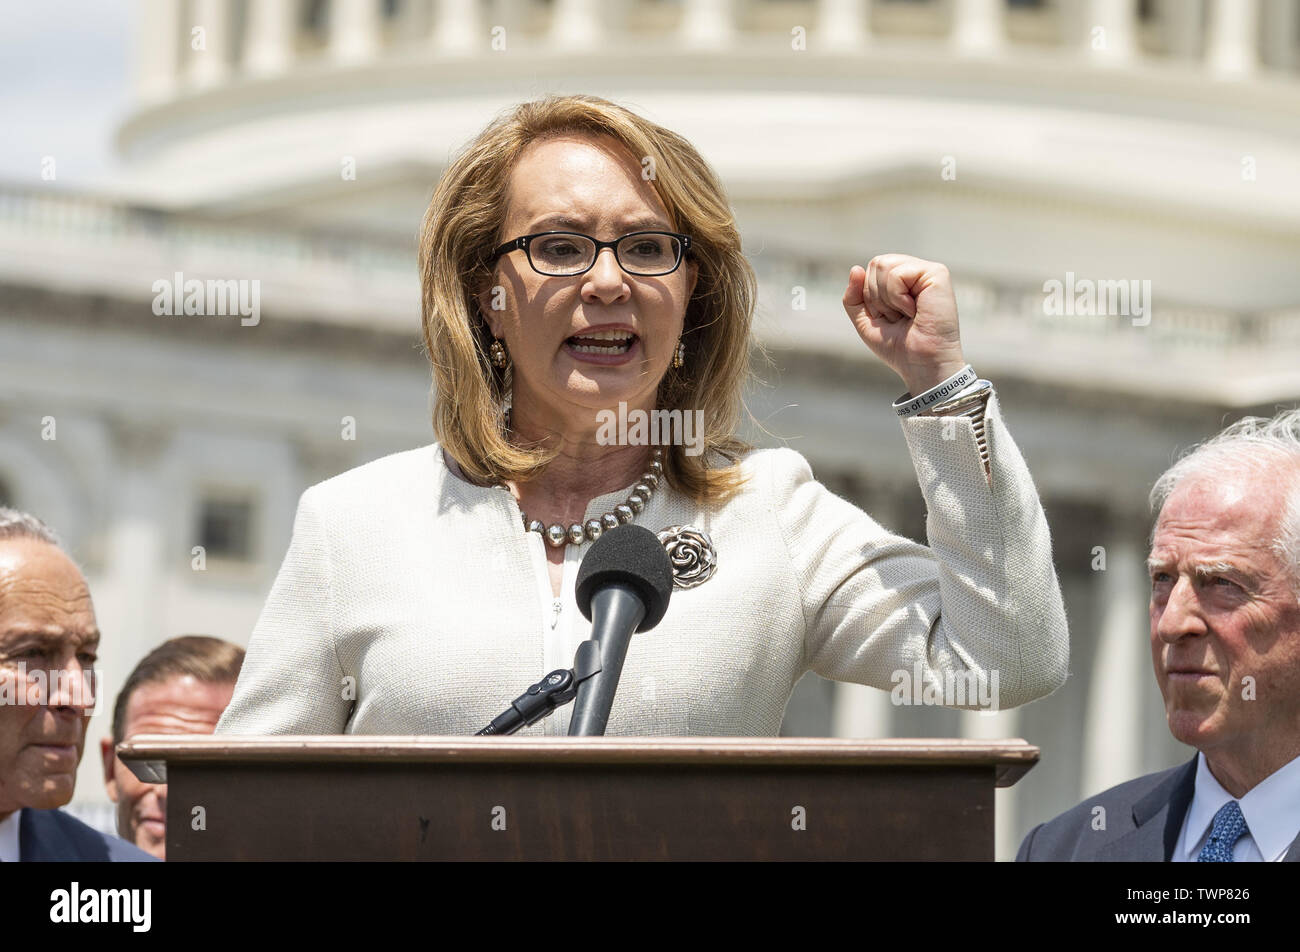 June 20, 2019, Washington, District of Columbia, U.S.: Former U.S. Representative and shooting survivor GABBY GIFFORDS (D-AZ) speaking at an event in front of the Capitol to urge the passage of H.R. 8 universal (gun ownership) background checks legislation. Event held on the grass on the eastern side of the U.S. Capitol. Credit: Michael Brochstein/ZUMA Wire/Alamy Live News Stock Photo